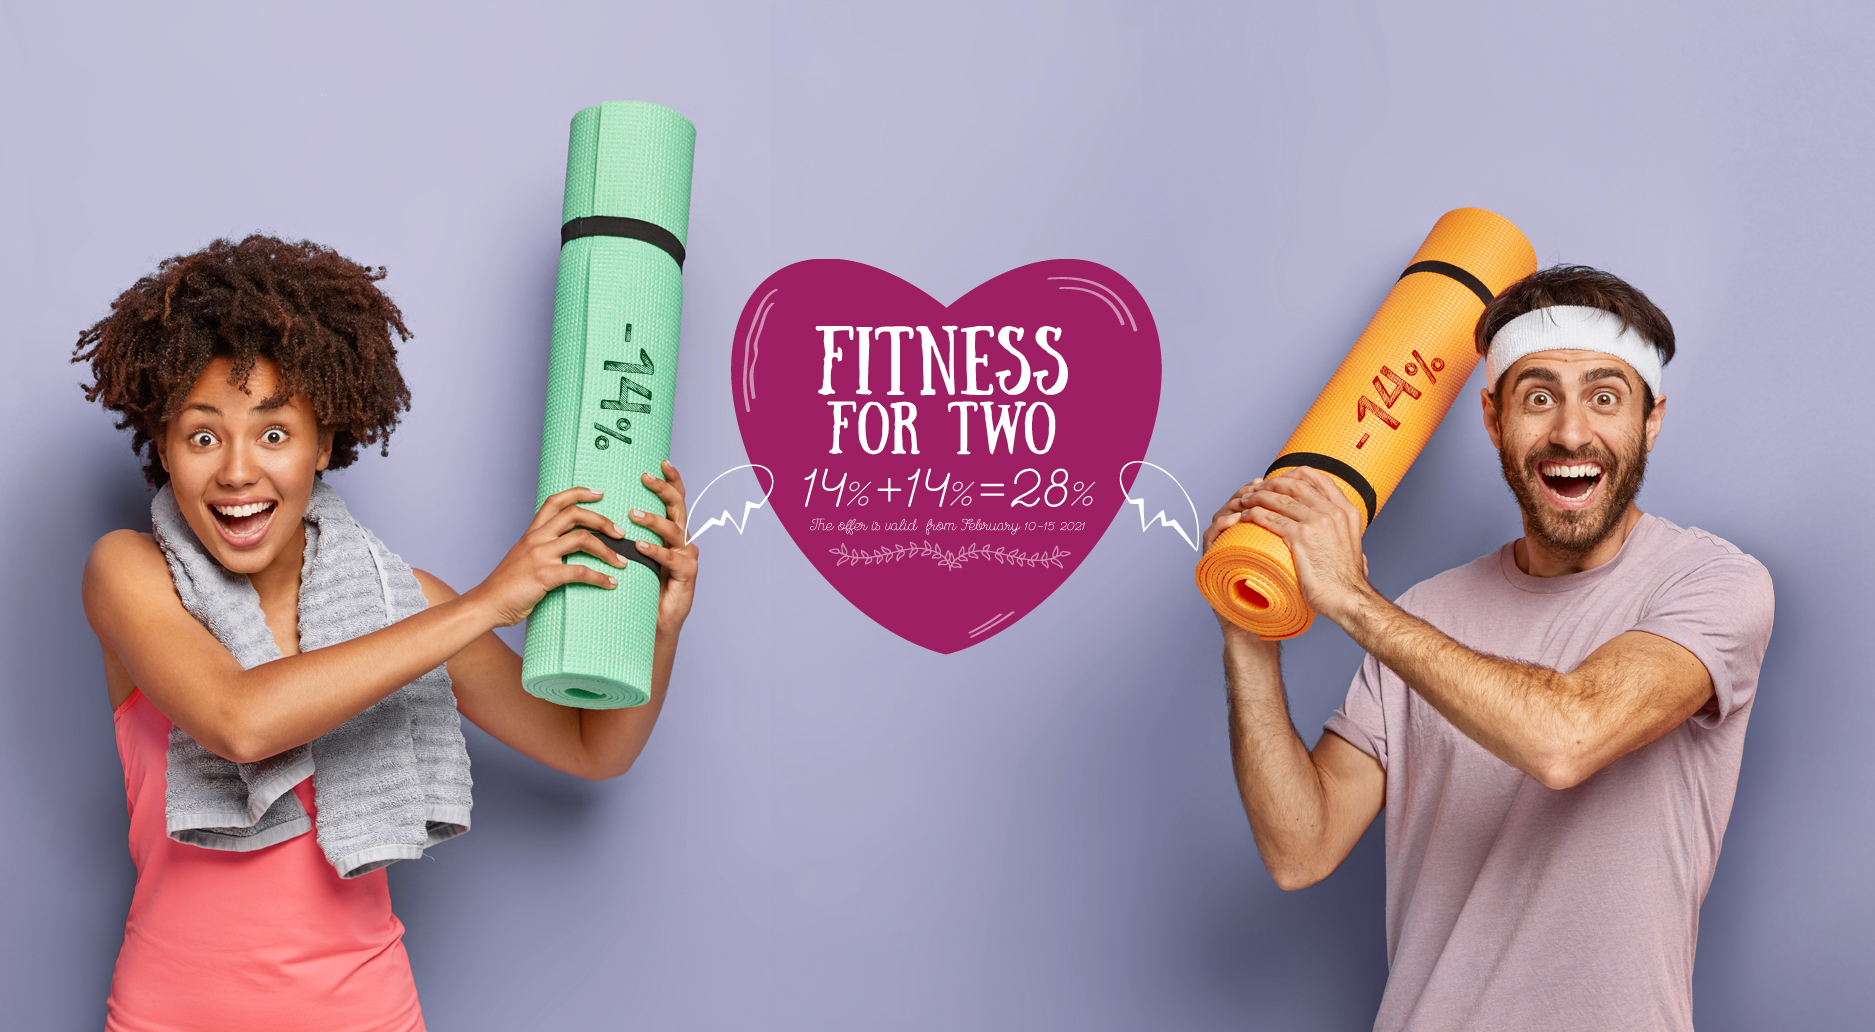 Fitness for two